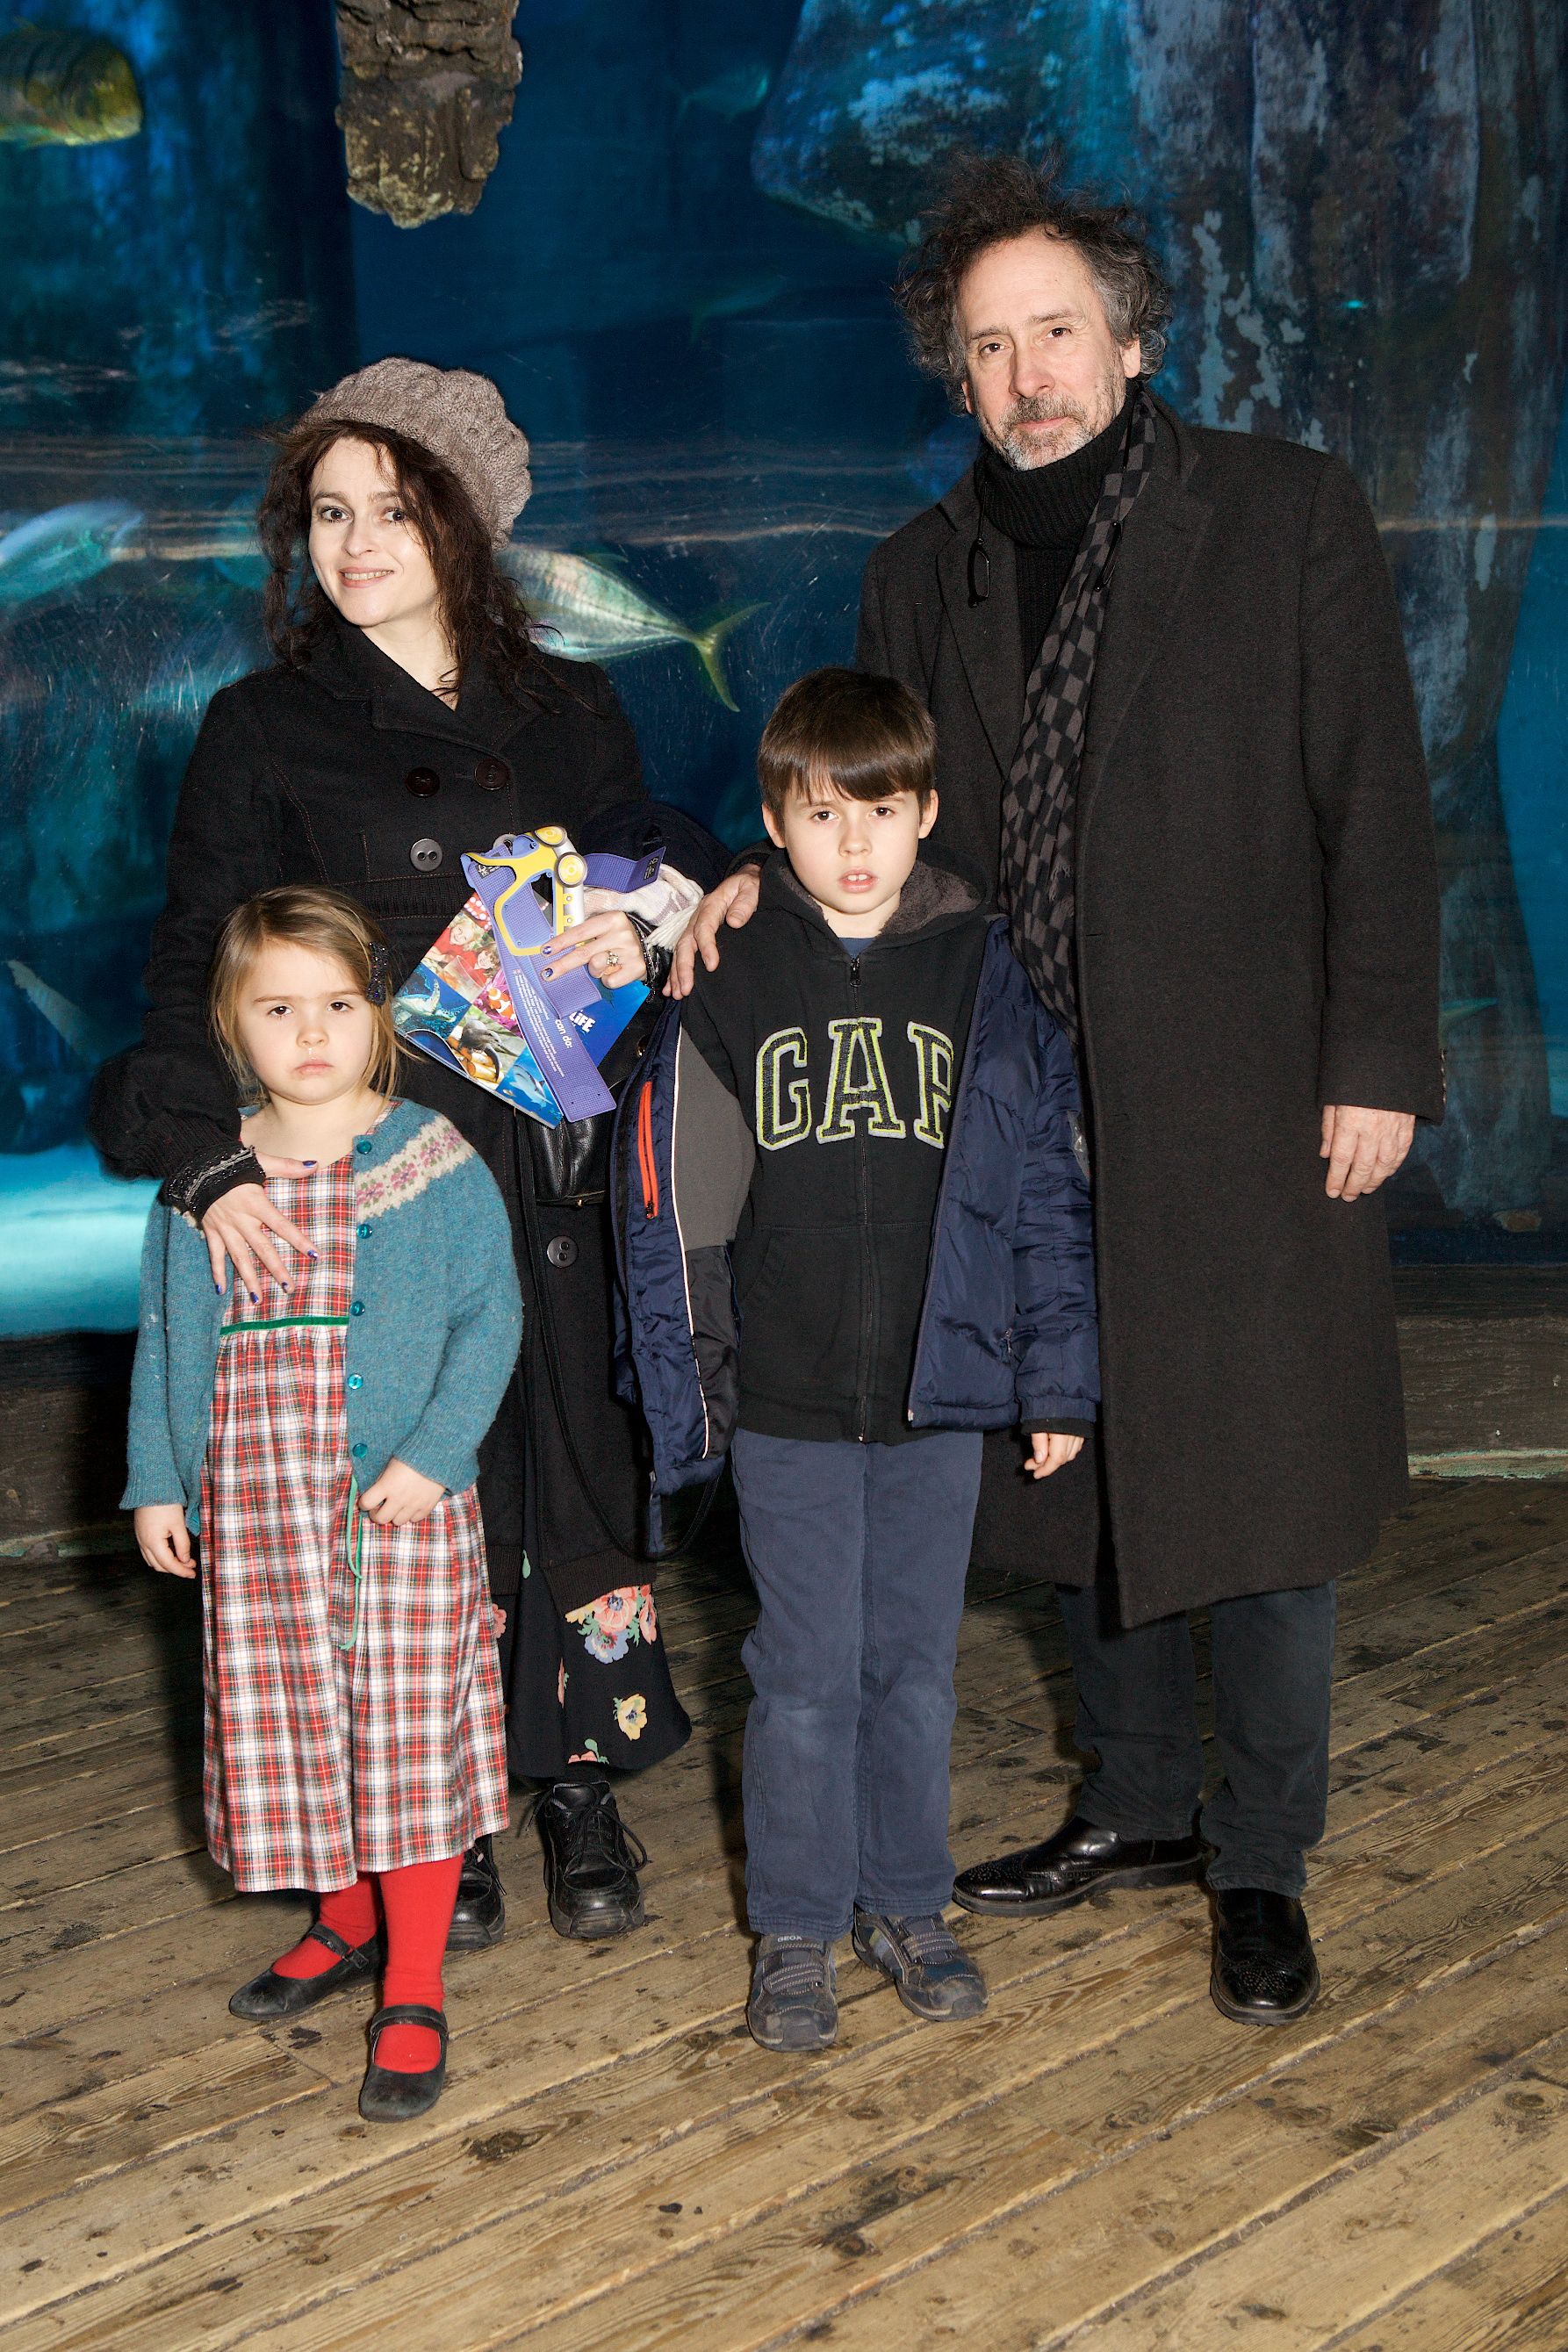 <p>Helena Bonham Carter and then-partner Tim Burton brought their<span> children, Billy (then 9) and Nell (then 5) to the "Ocean of Stars" launch at the SEA LIFE London Aquarium on March 24, 2013.</span> The director and the actress, both two-time Oscar nominees, got together in 2001 and split in 2014. </p>